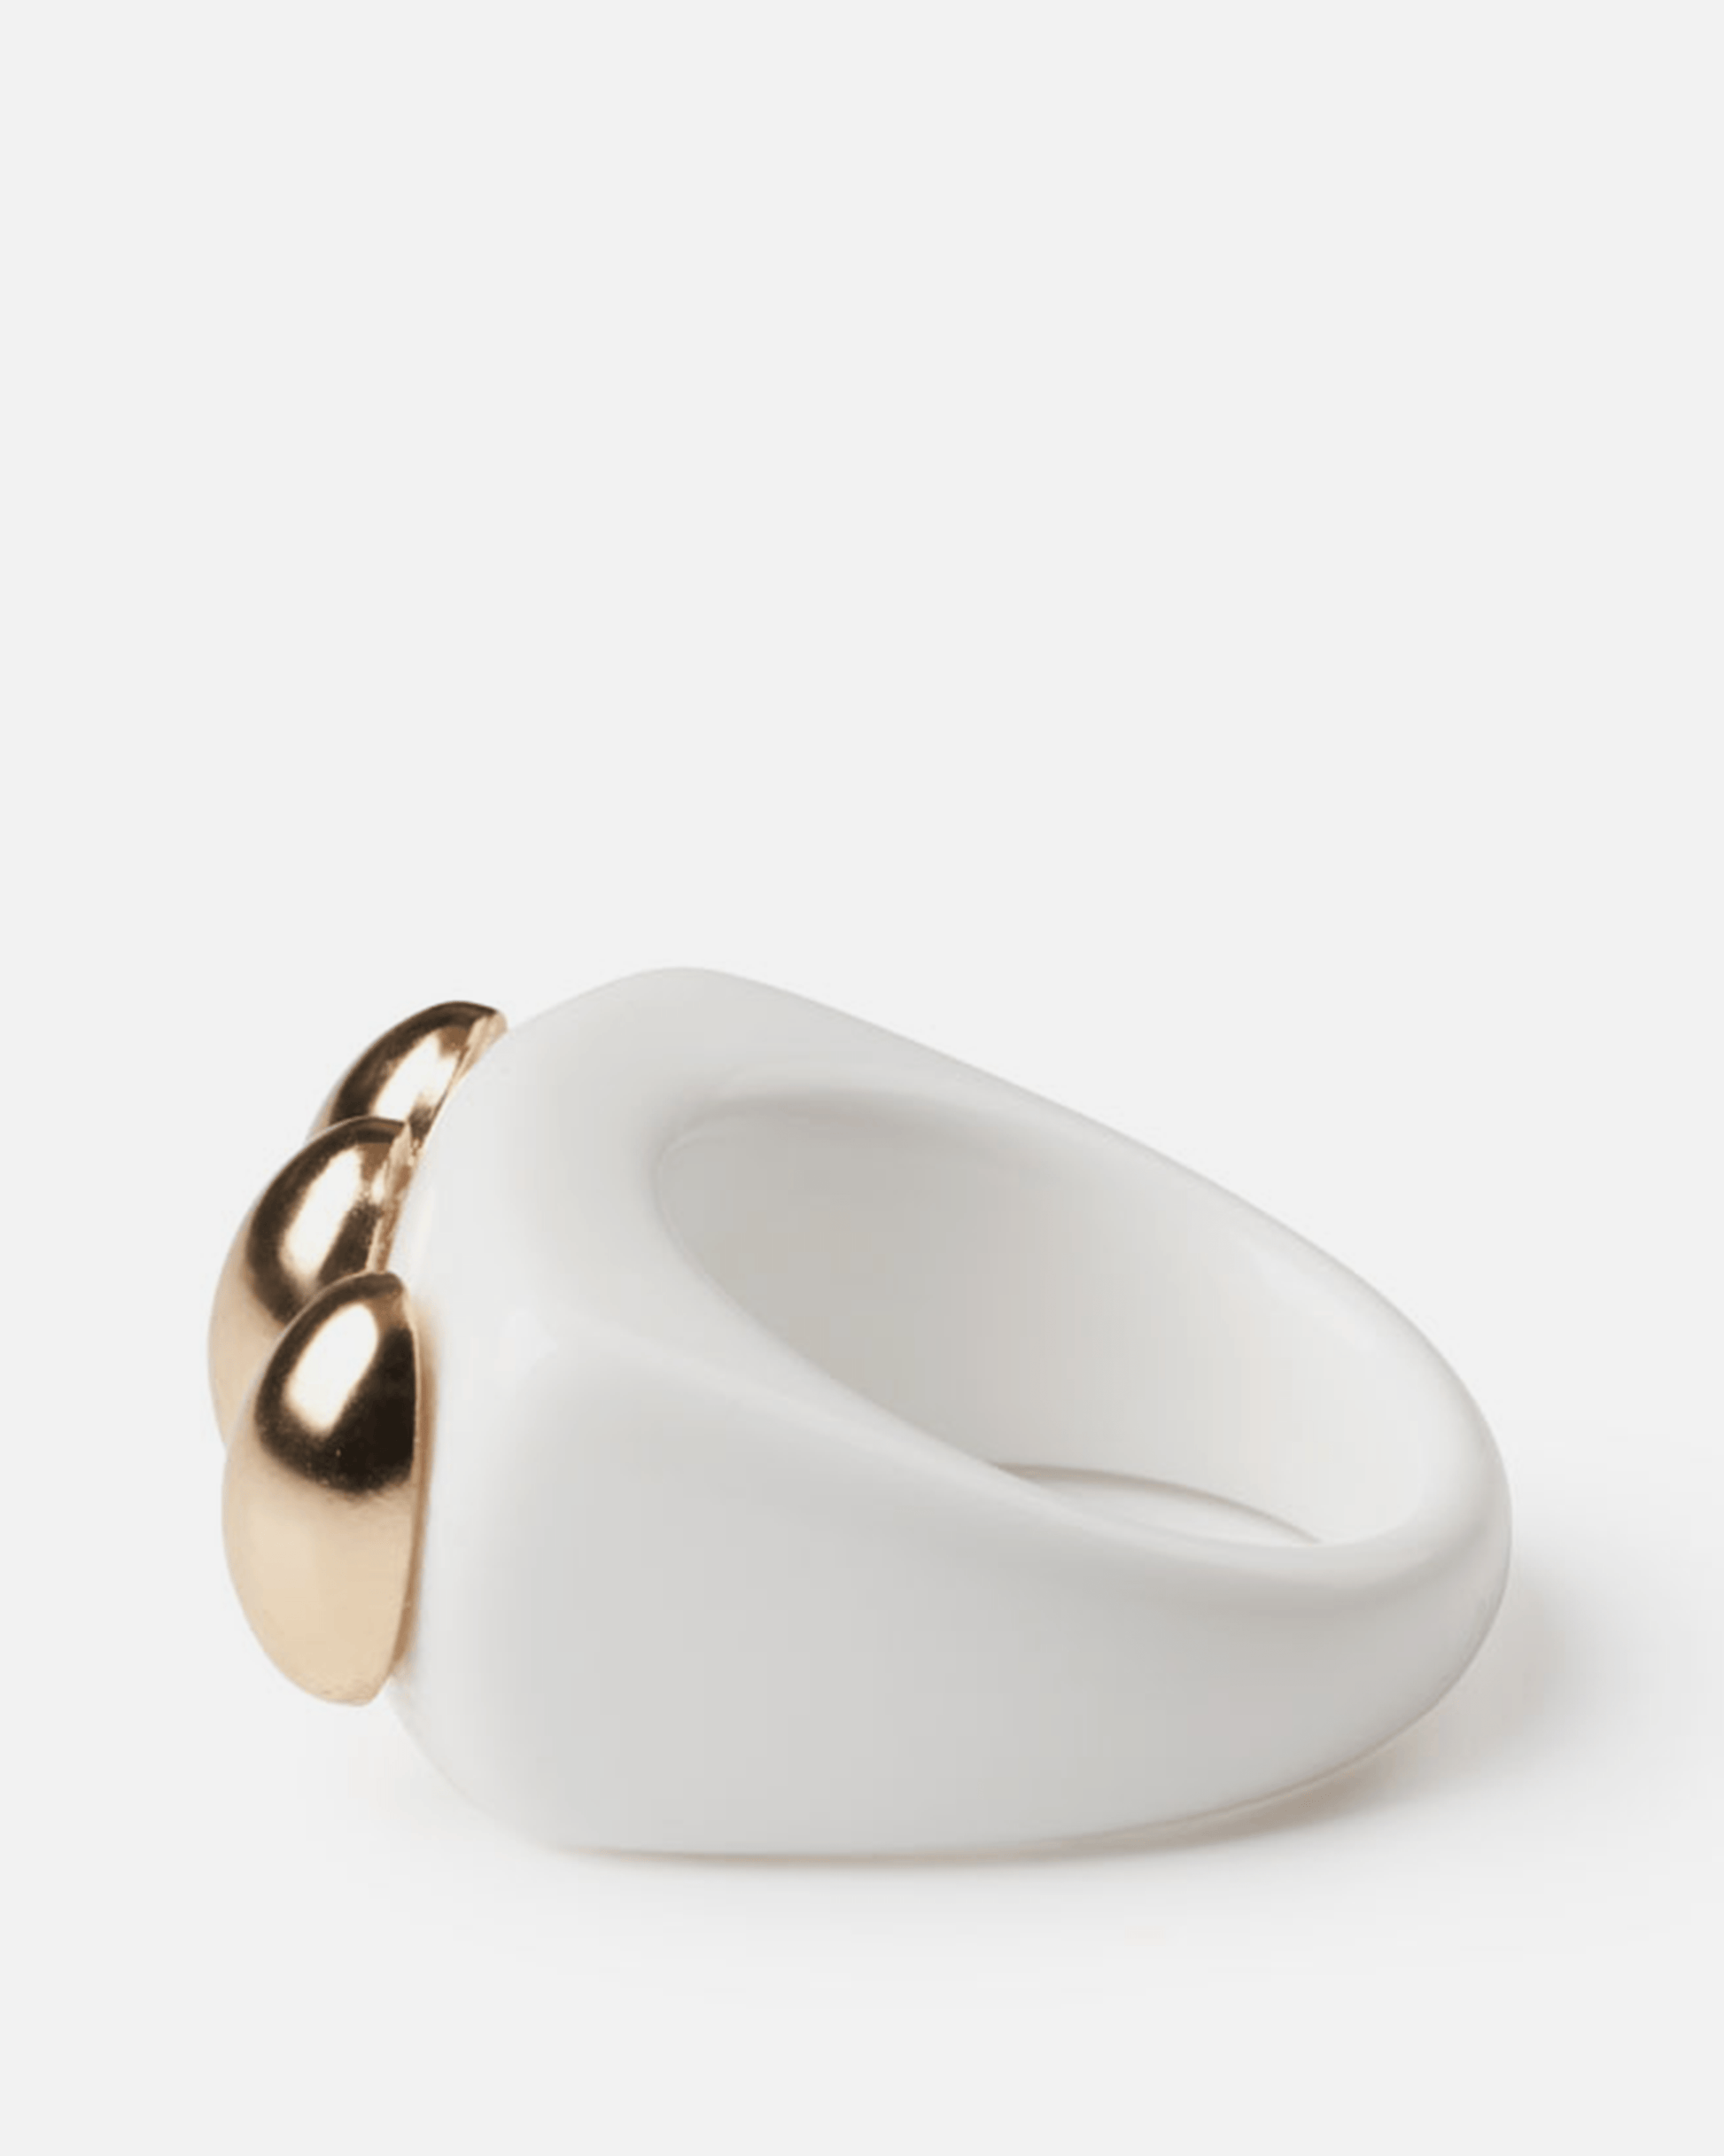 La Manso Jewelry Knuckle Duster Ring in White